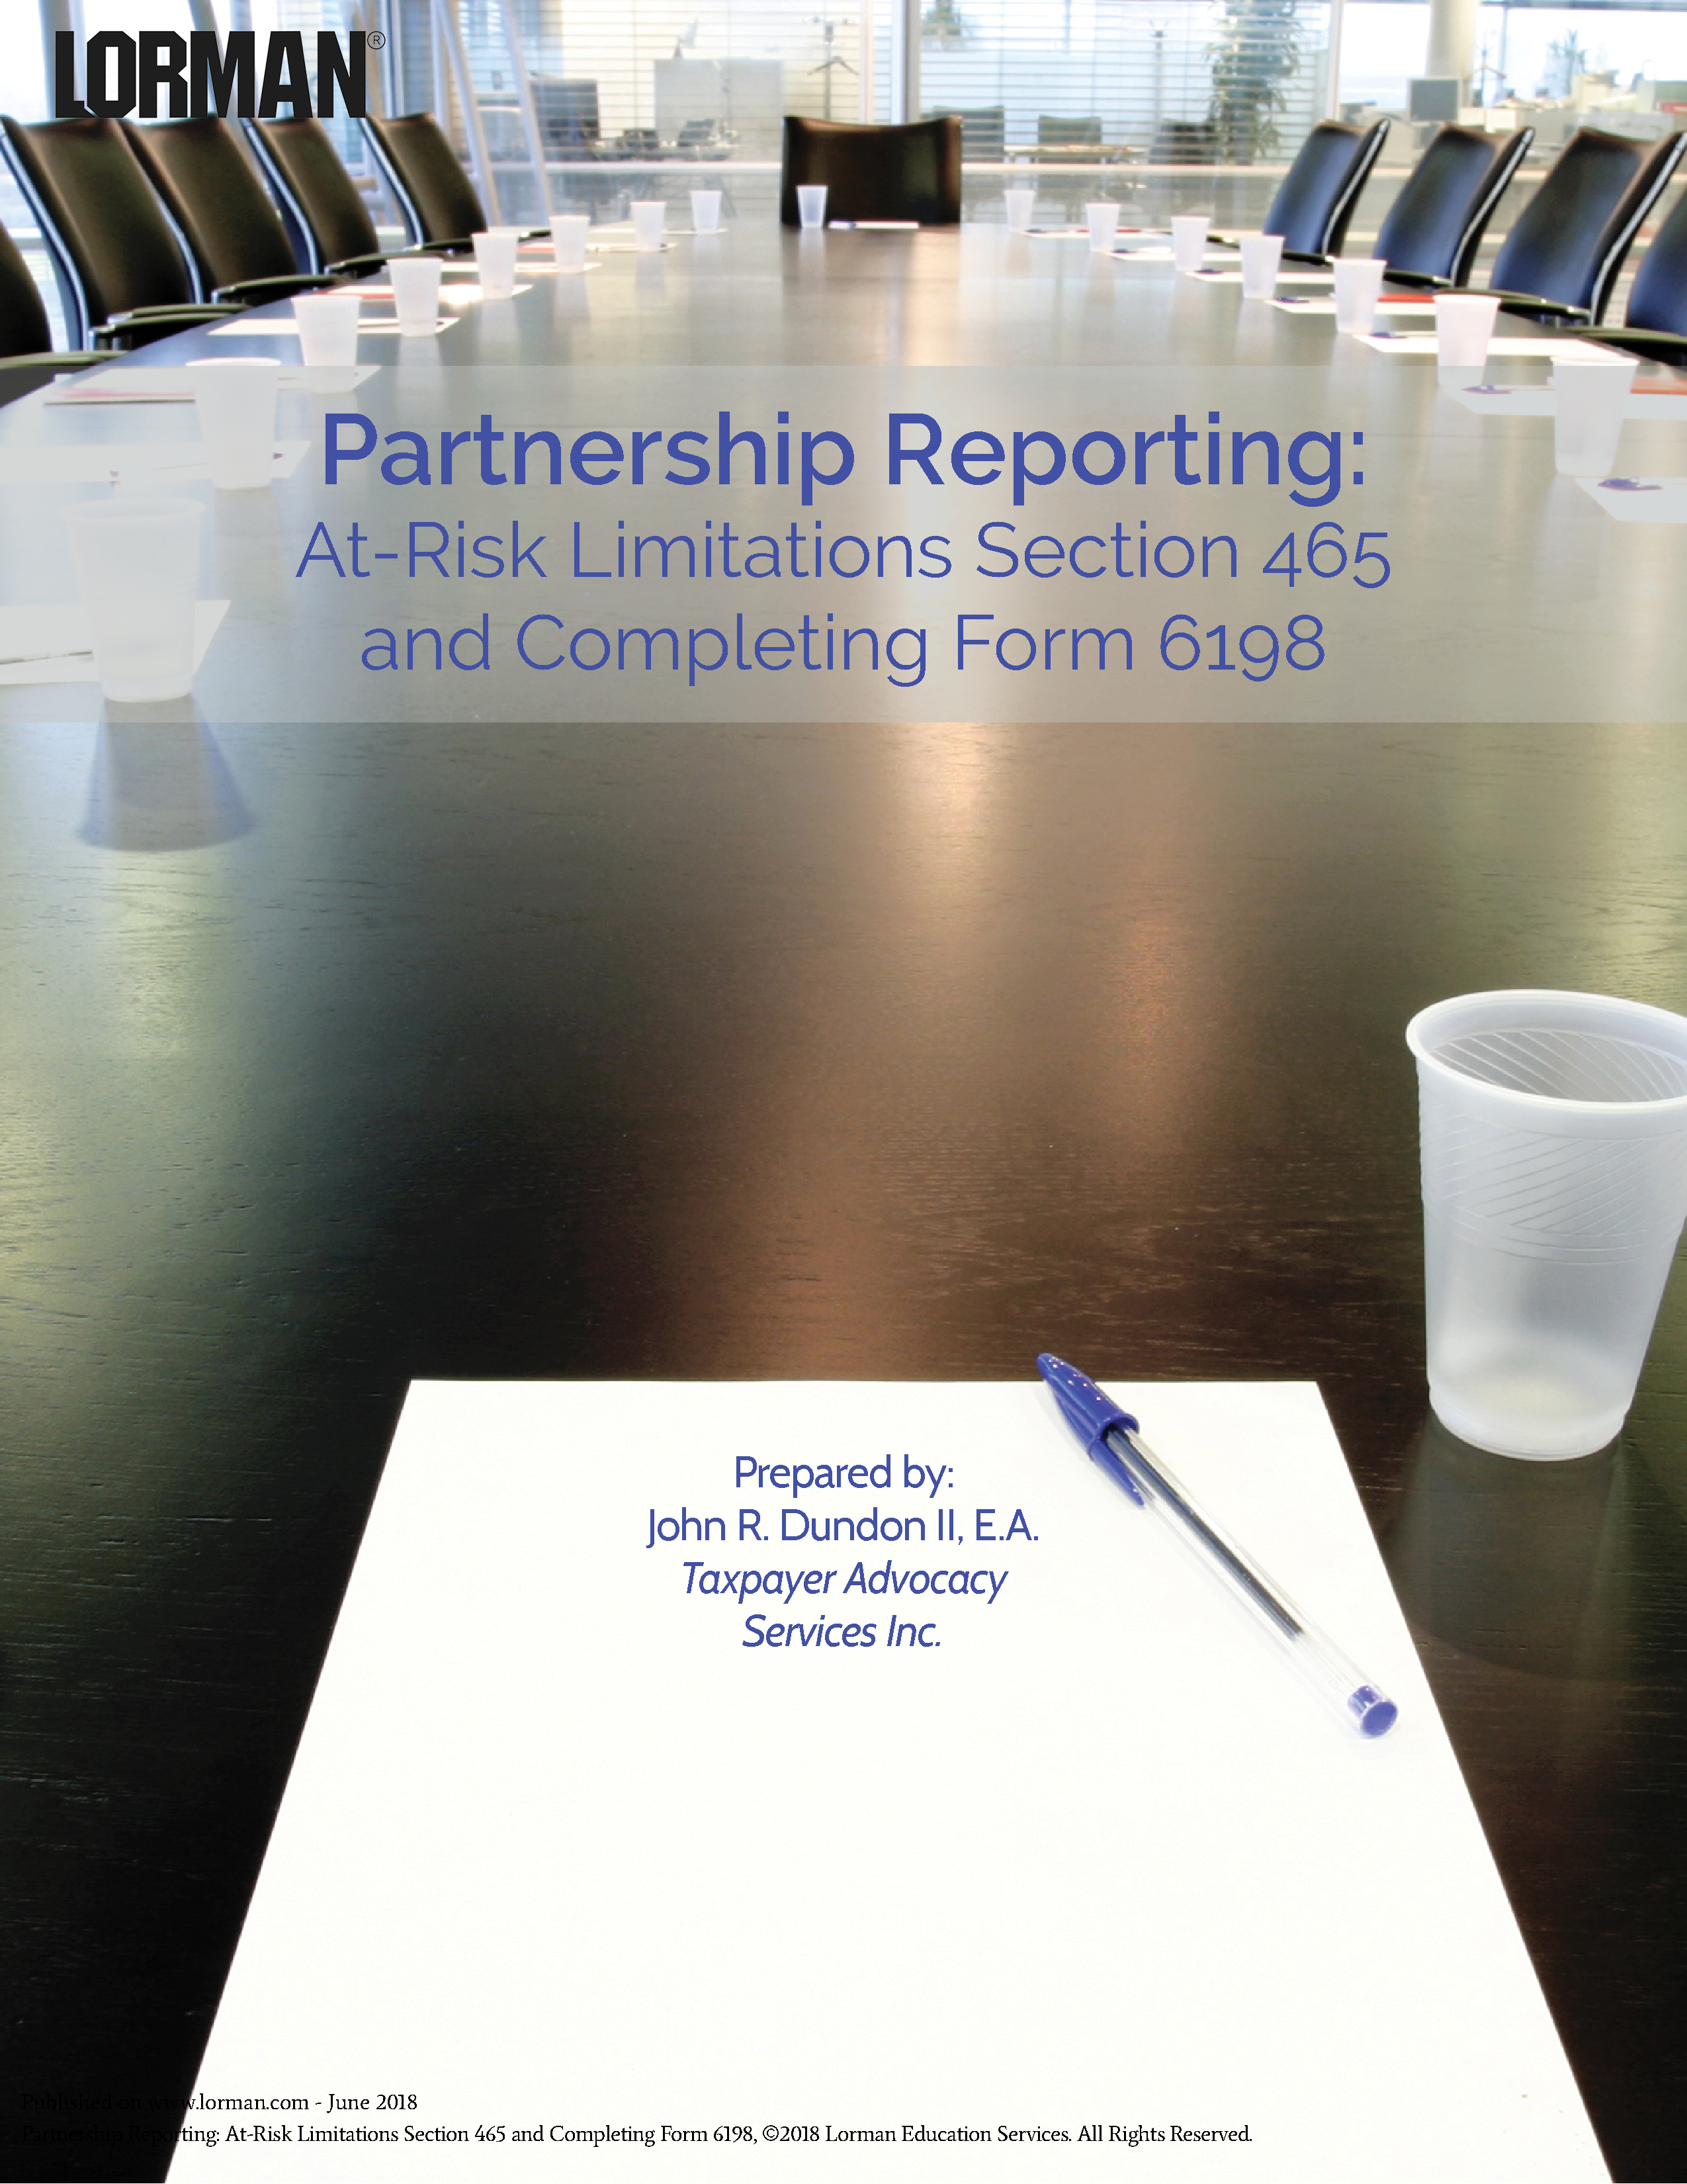 Partnership Reporting: At-Risk Limitations Section 465 and Completing Form 6198